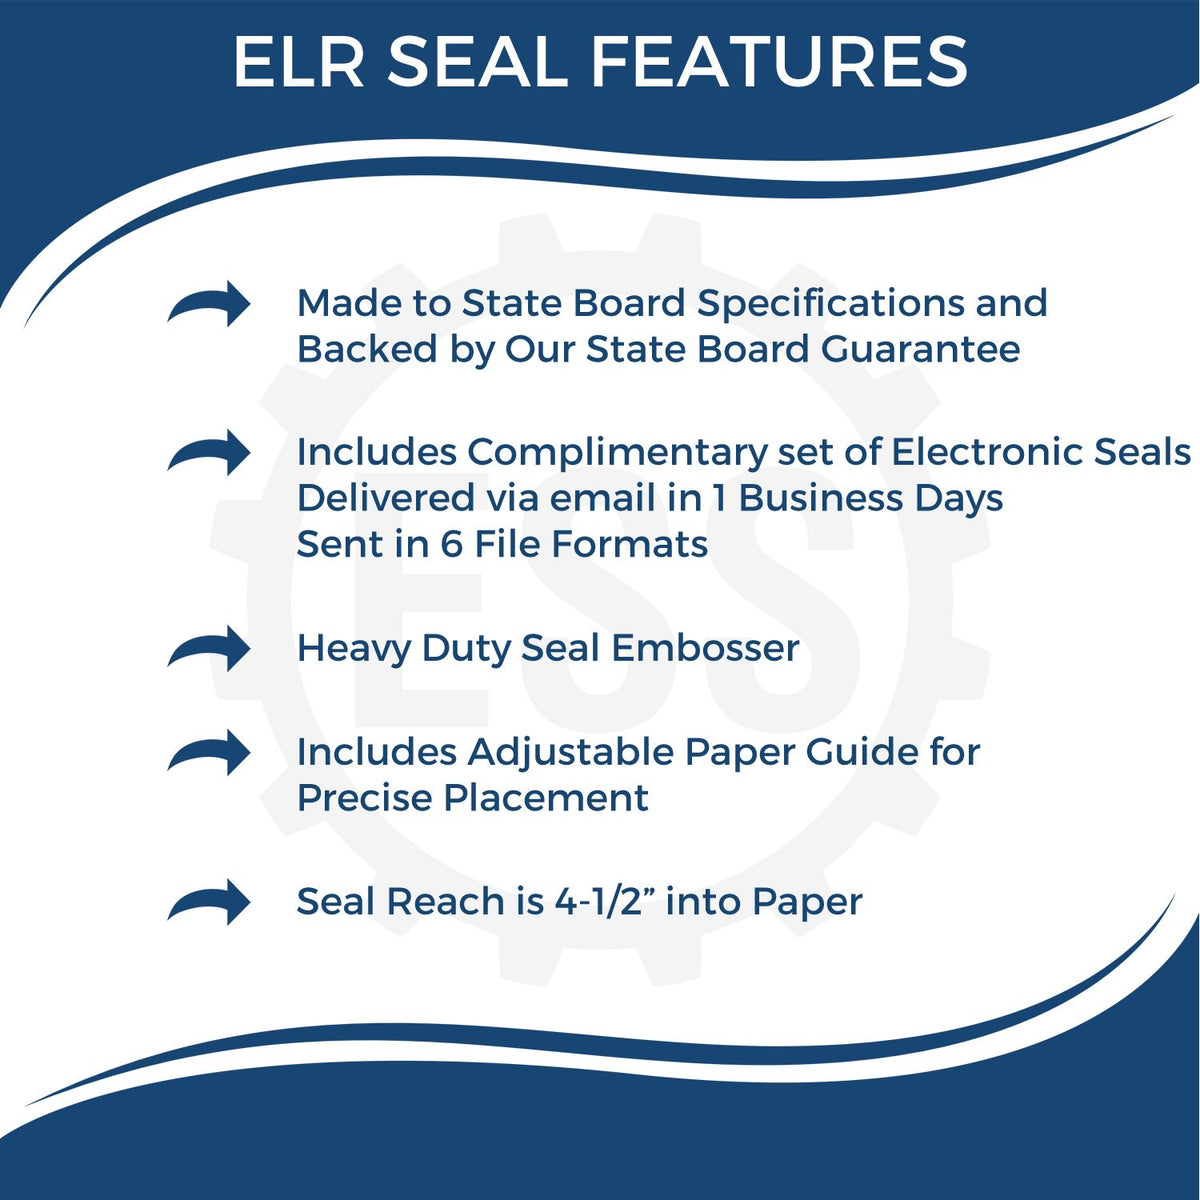 A picture of an infographic highlighting the selling points for the Extended Long Reach Hawaii Architect Seal Embosser